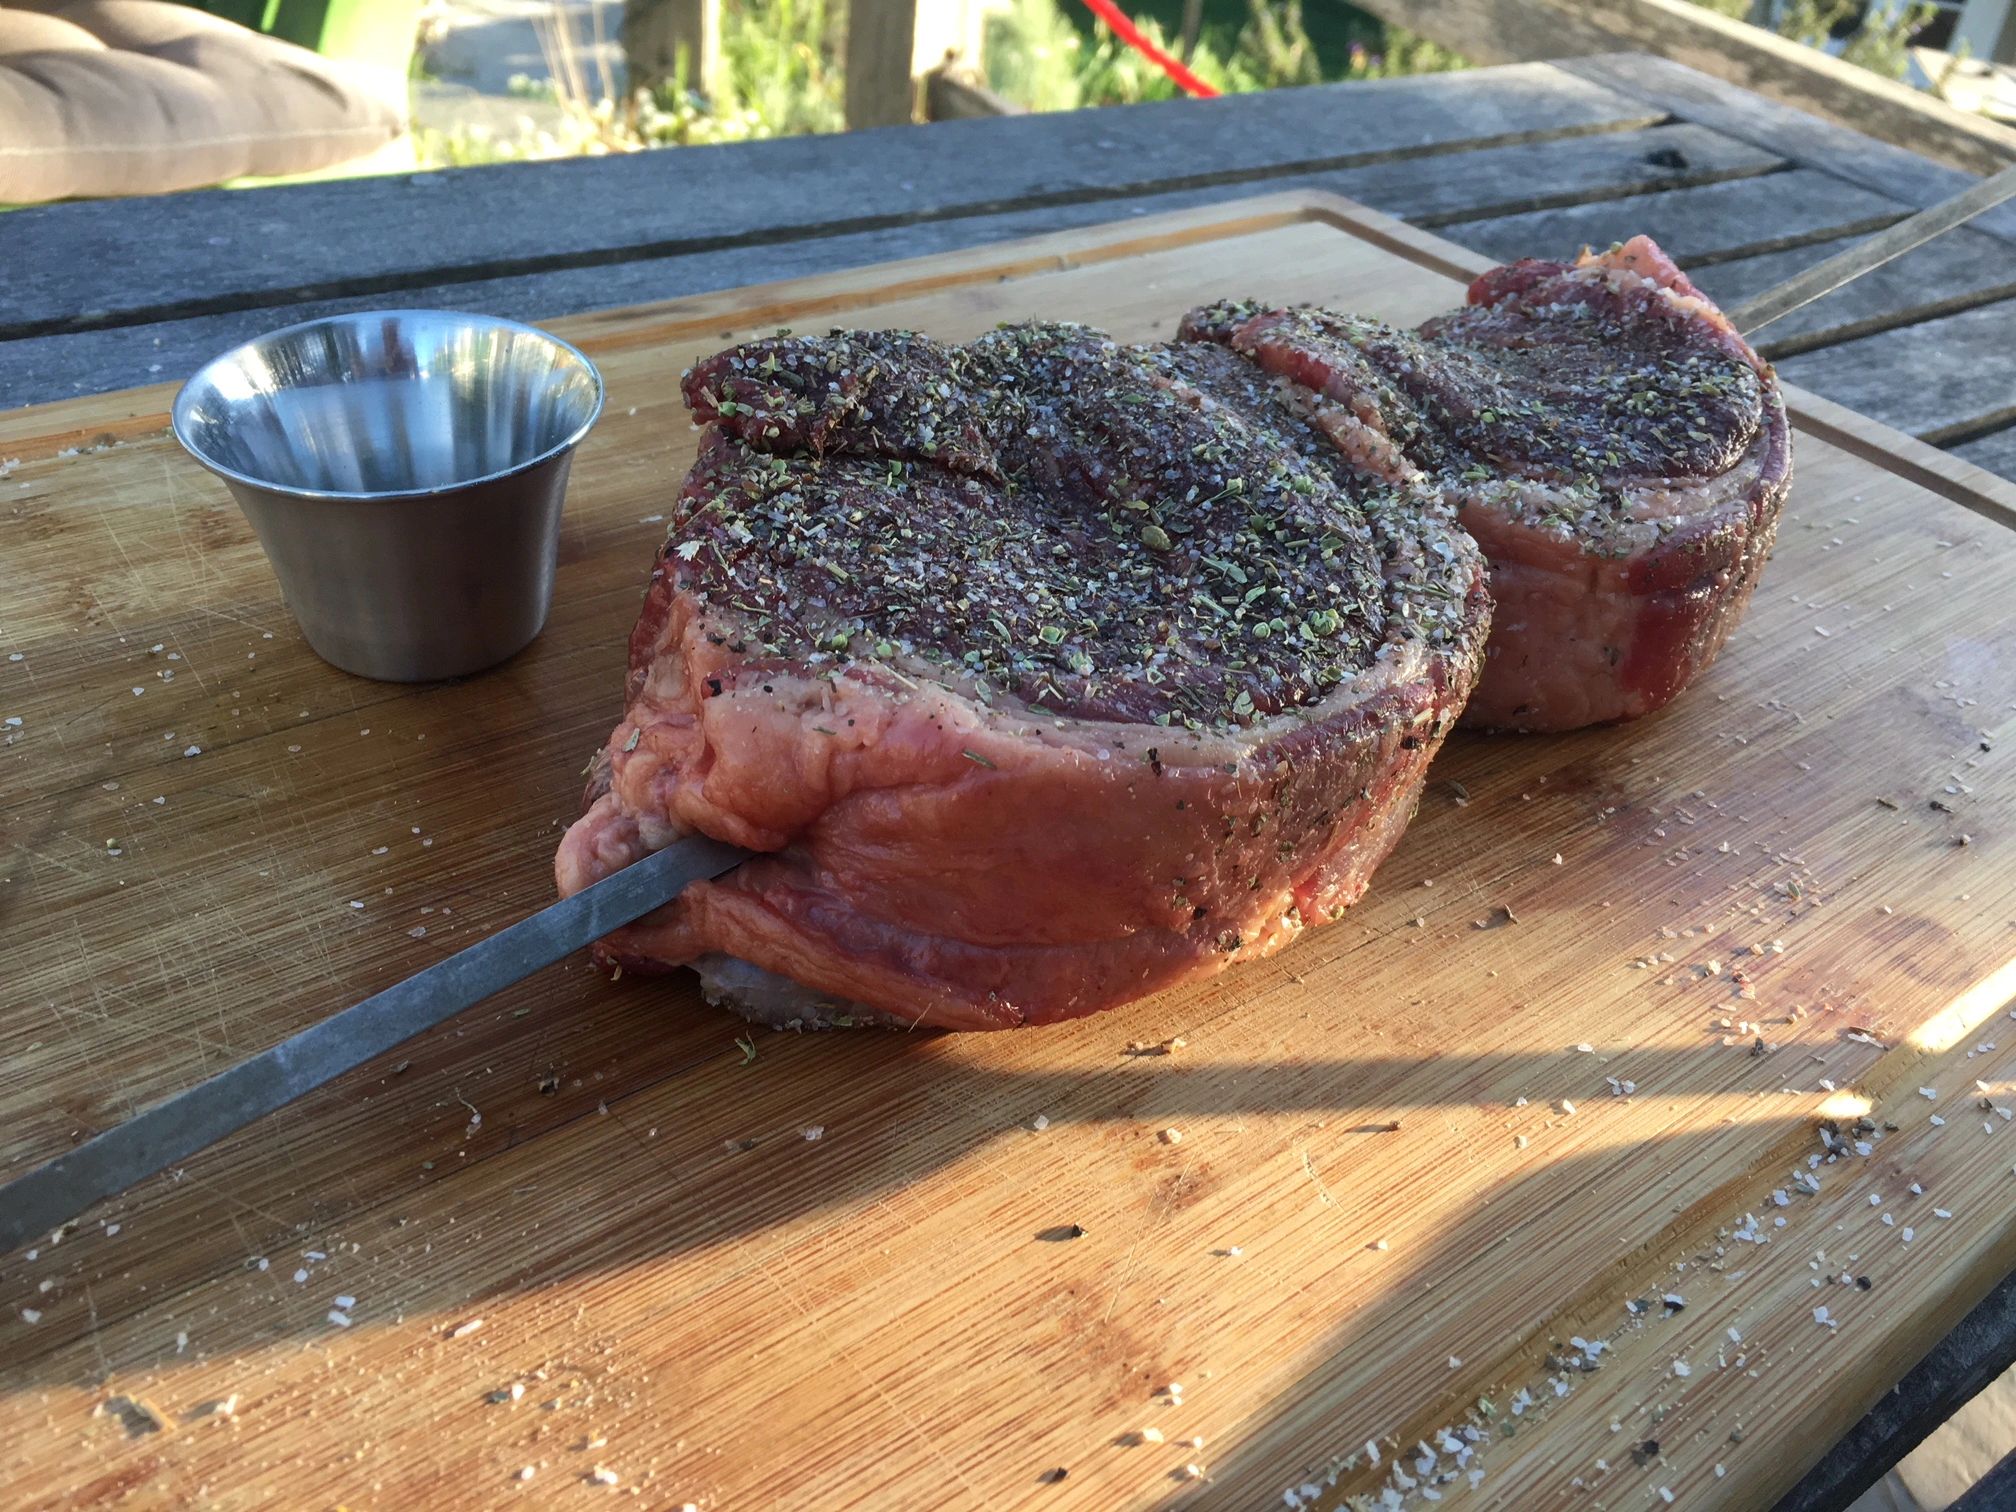 Churrasco meat on a cutting board next to a knife